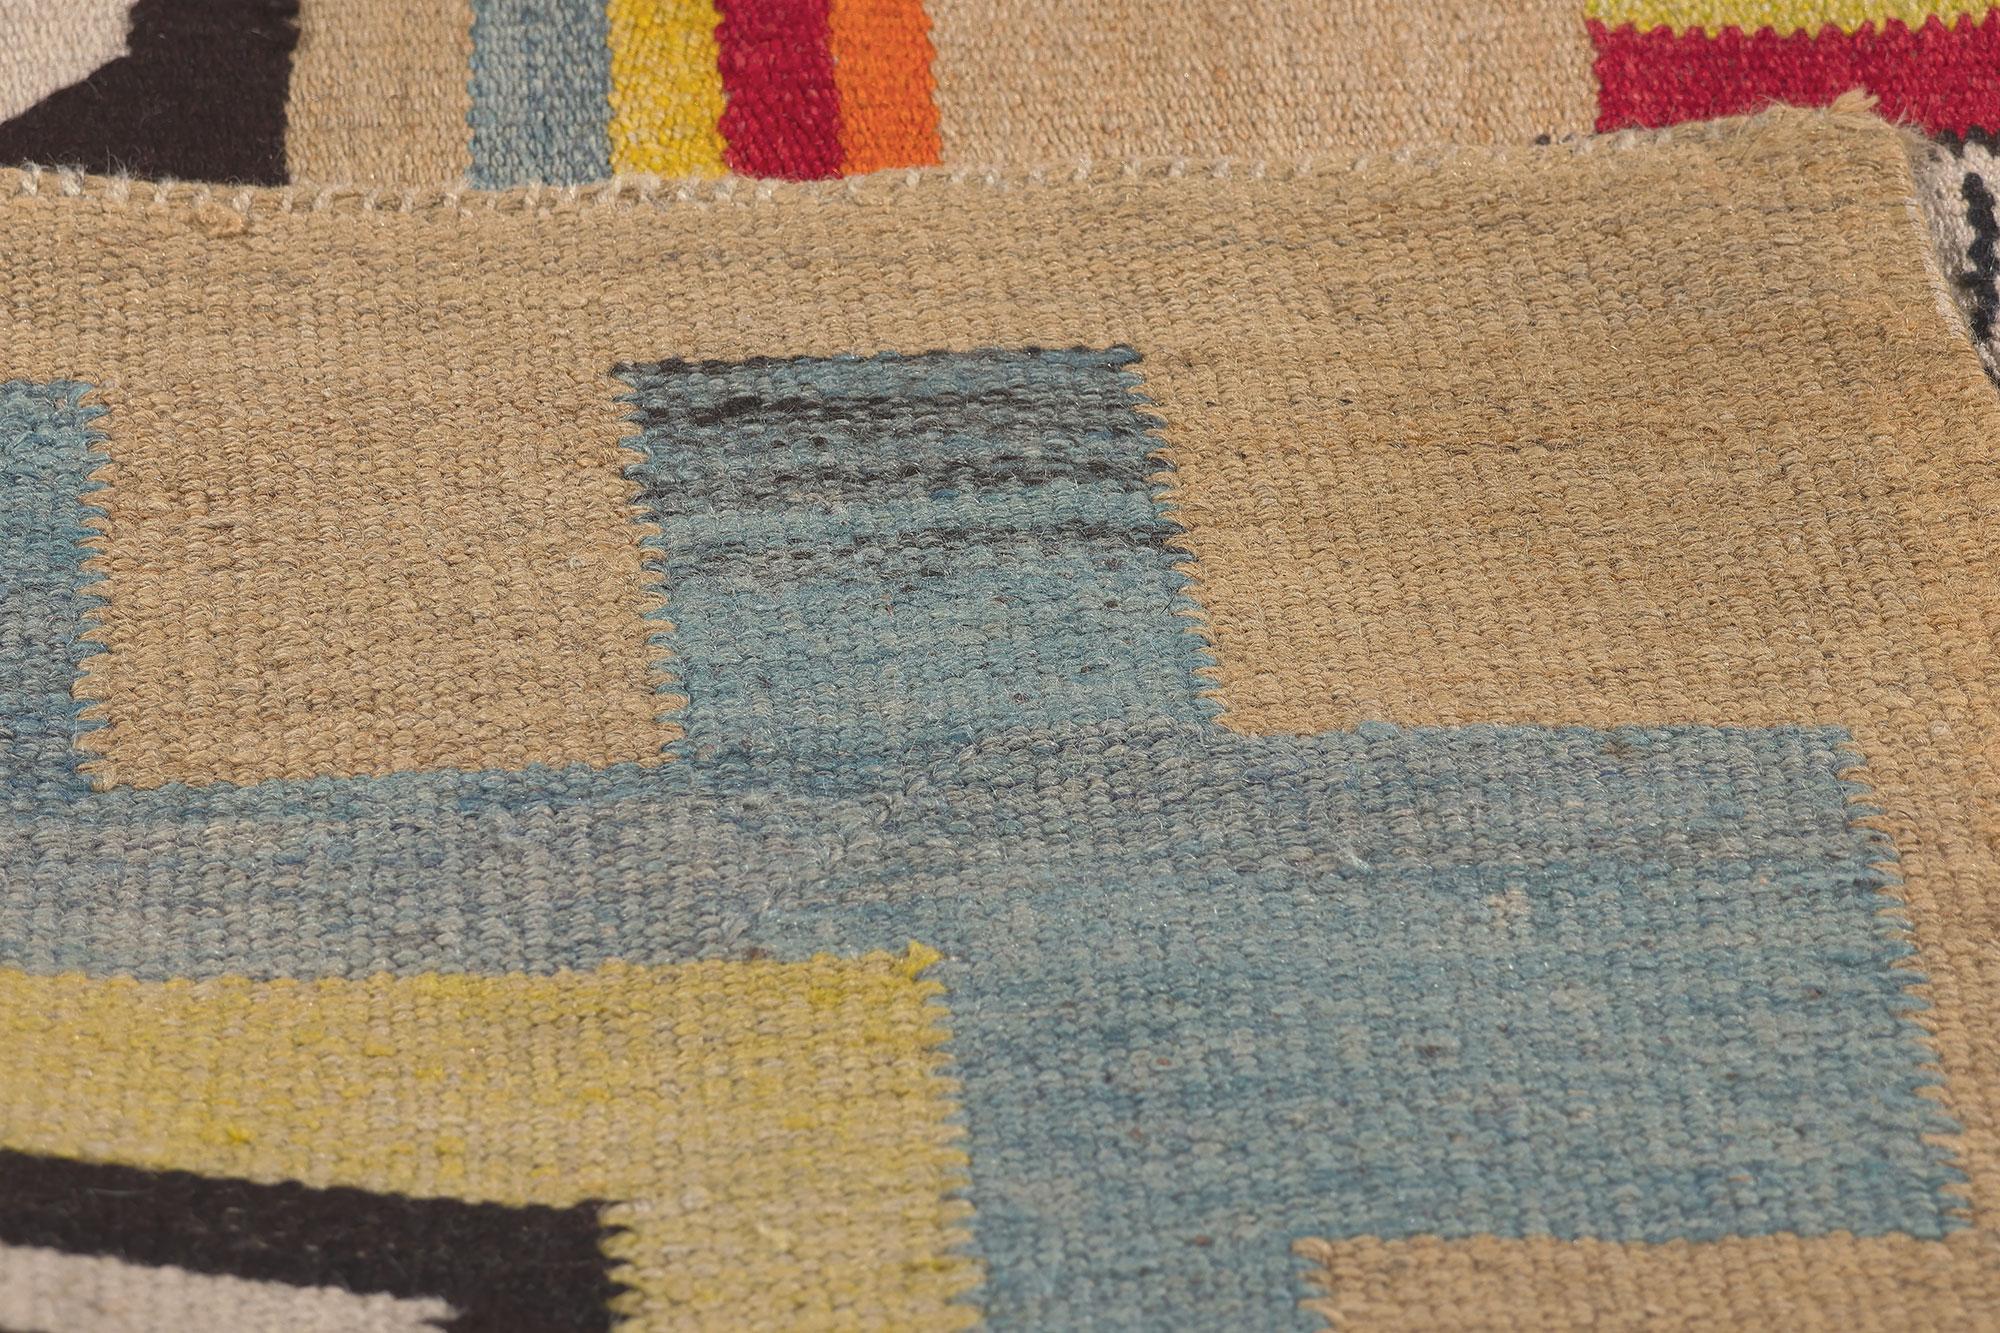 Hand-Woven Colorful Vintage South American Kilim Rug with Pre-Incan Viracocha Deity 